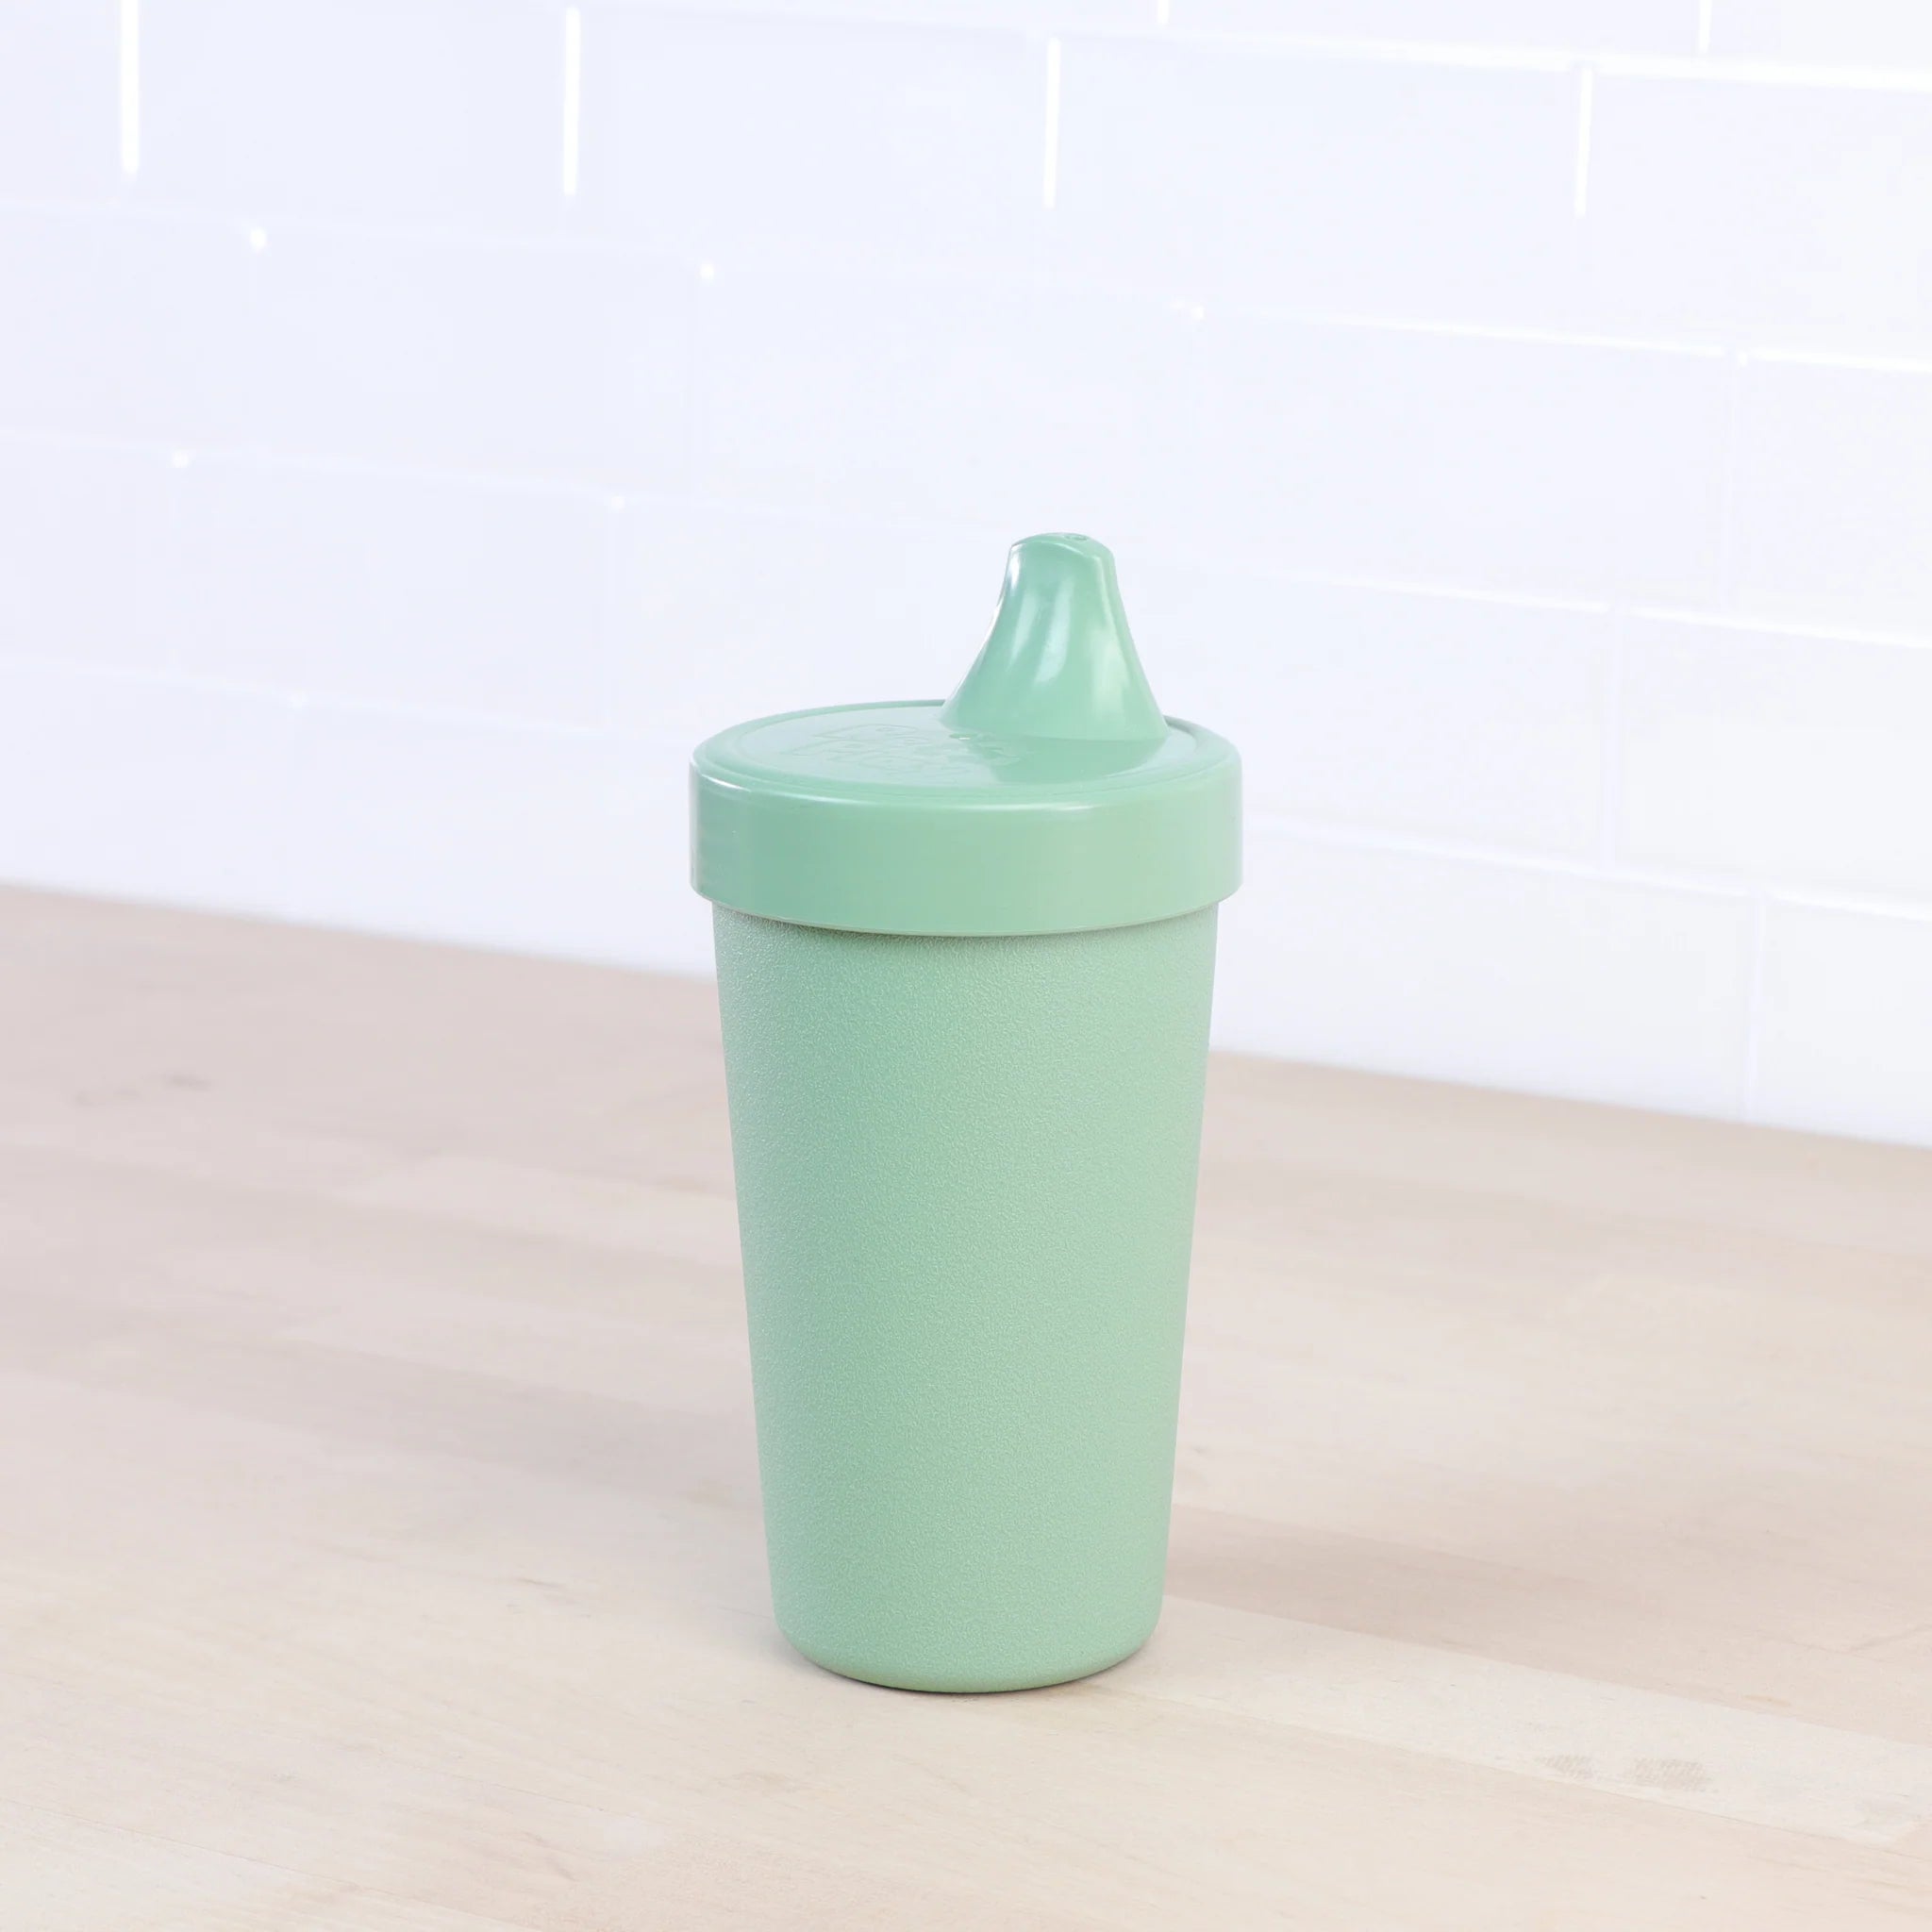 Re-Play No-Spill Sippy Cups